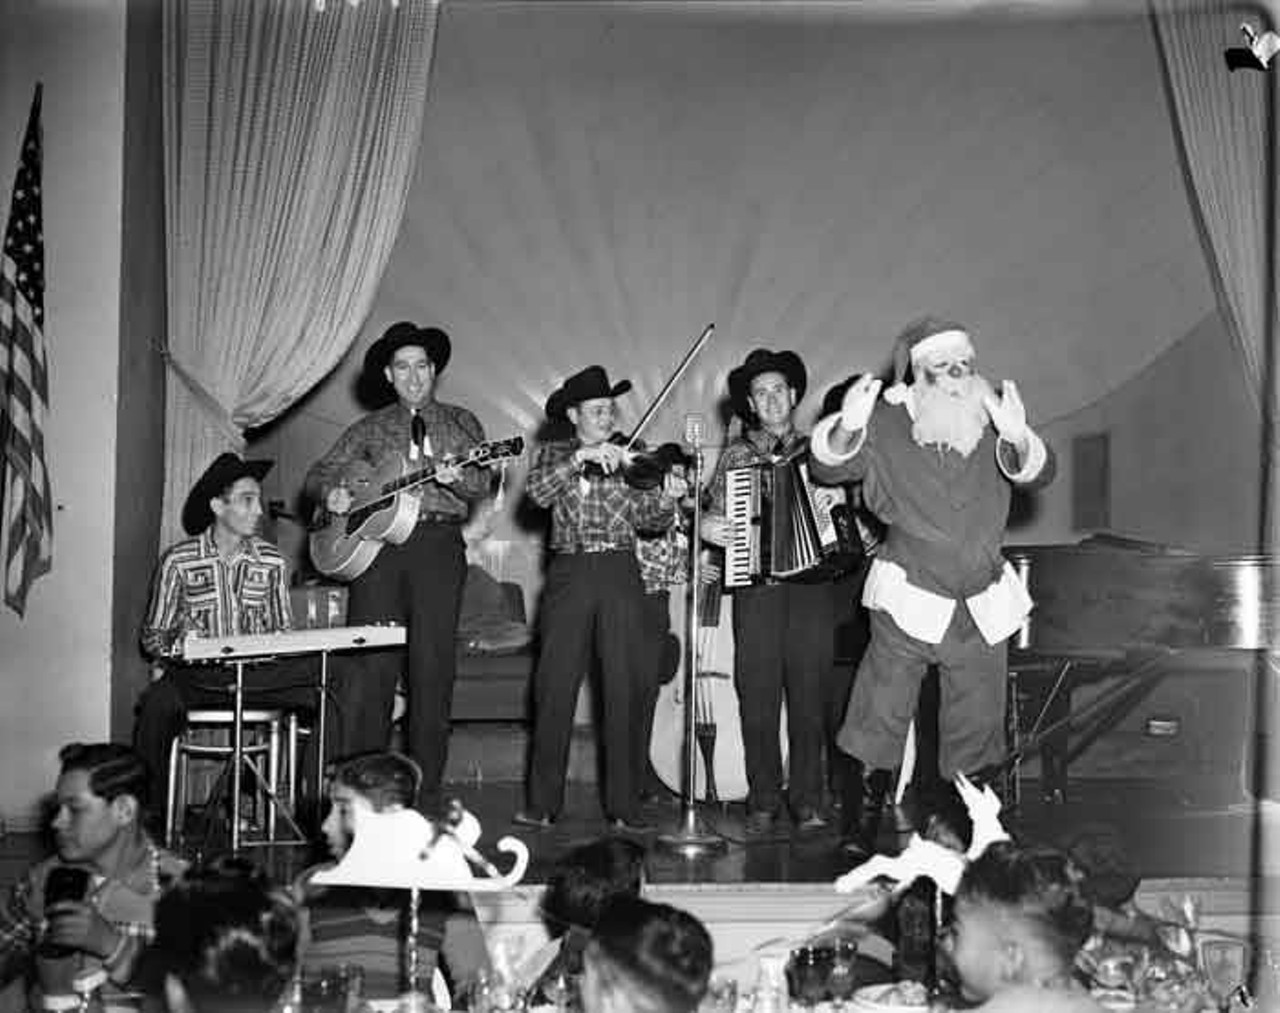 The Texas Top Hands and Santa Claus provided the entertainment for the annual Newsboys' Christmas Dinner in Crystal Ballroom of the Gunter Hotel in 1948.